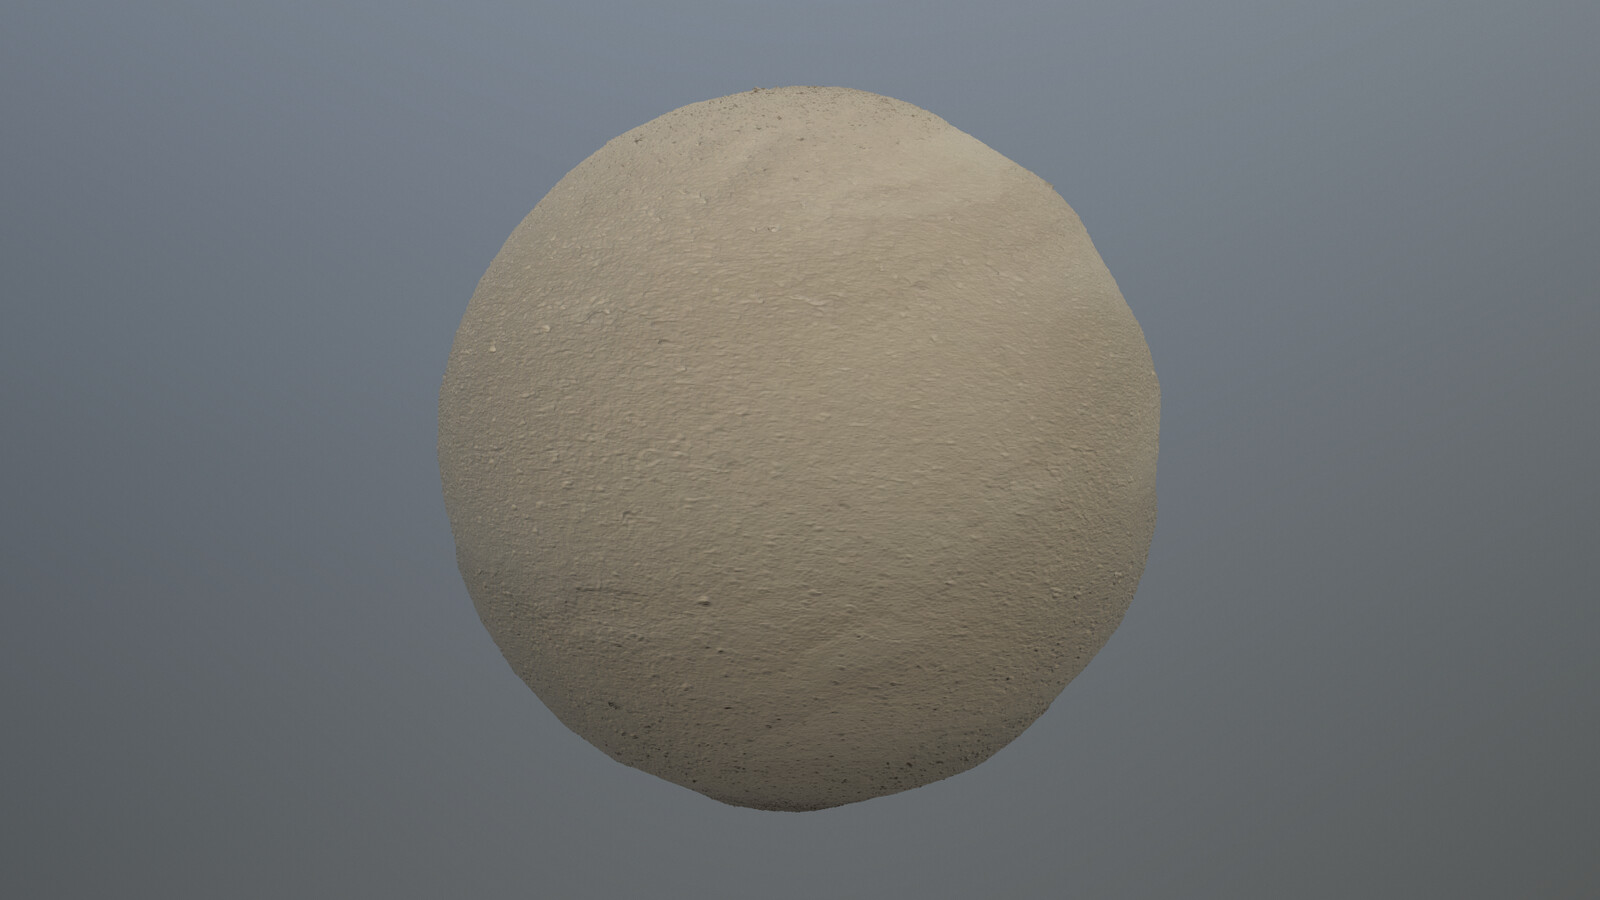 With displacement map